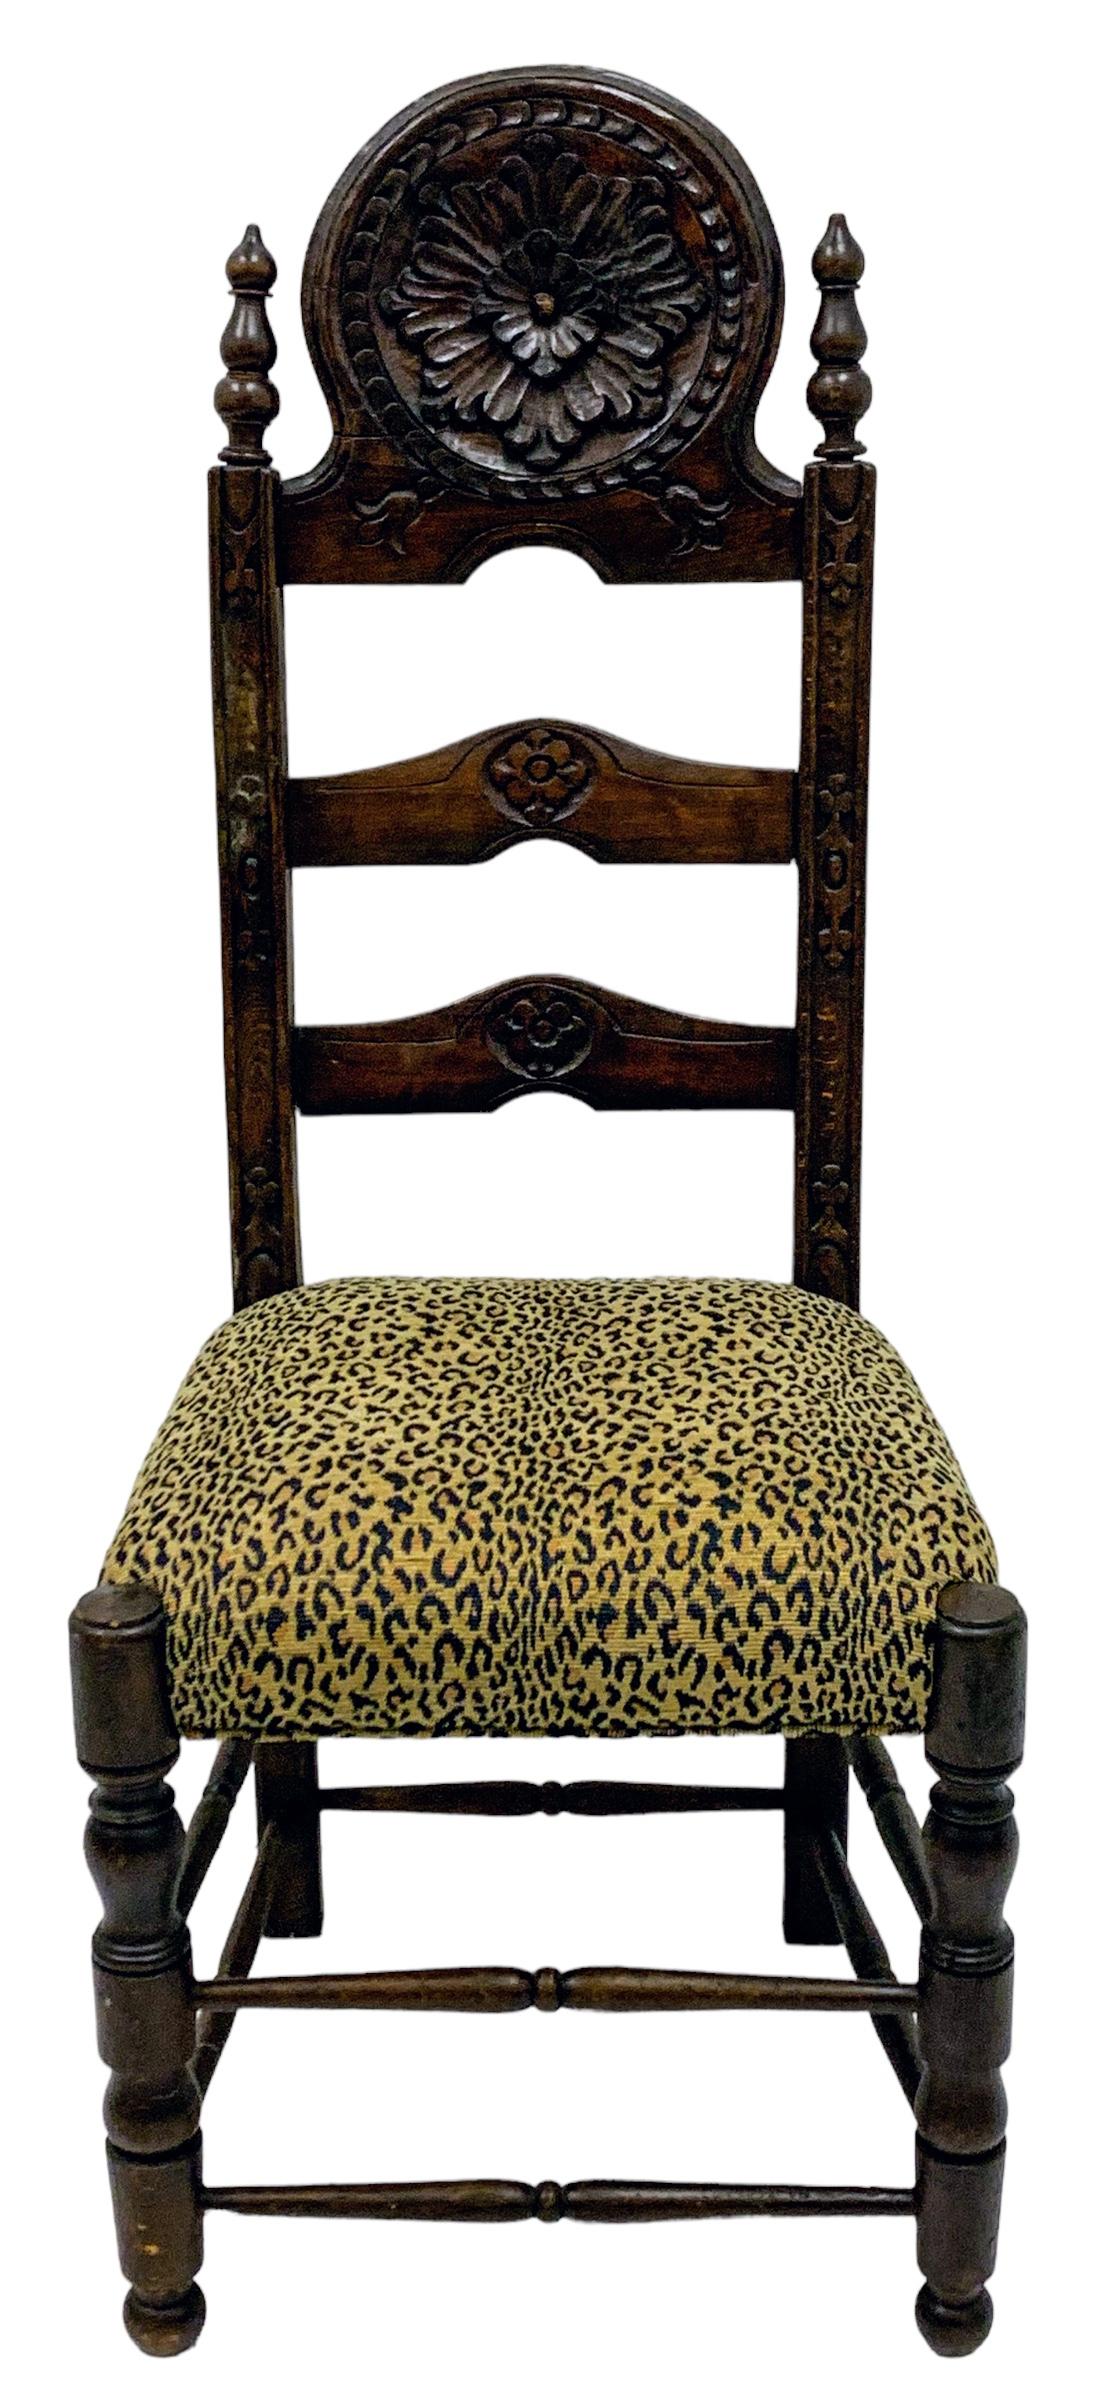 Upholstery 19th-C. French Carved Oak Ladder Back Side Chairs In Vintage Leopard - Pair For Sale